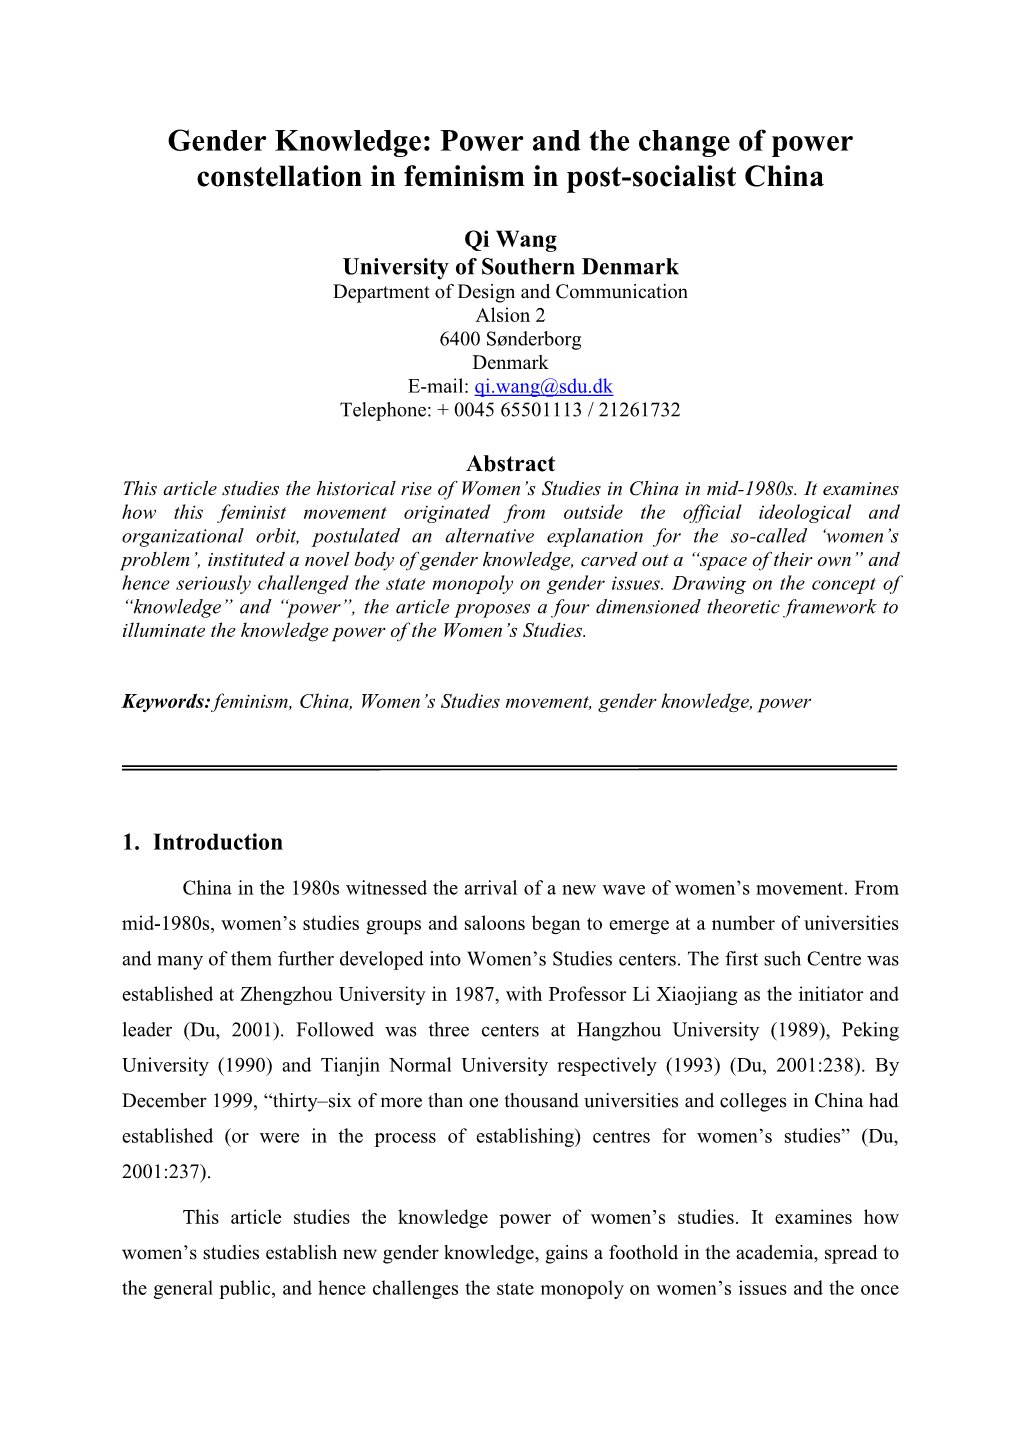 Gender Knowledge: Power and the Change of Power Constellation in Feminism in Post-Socialist China